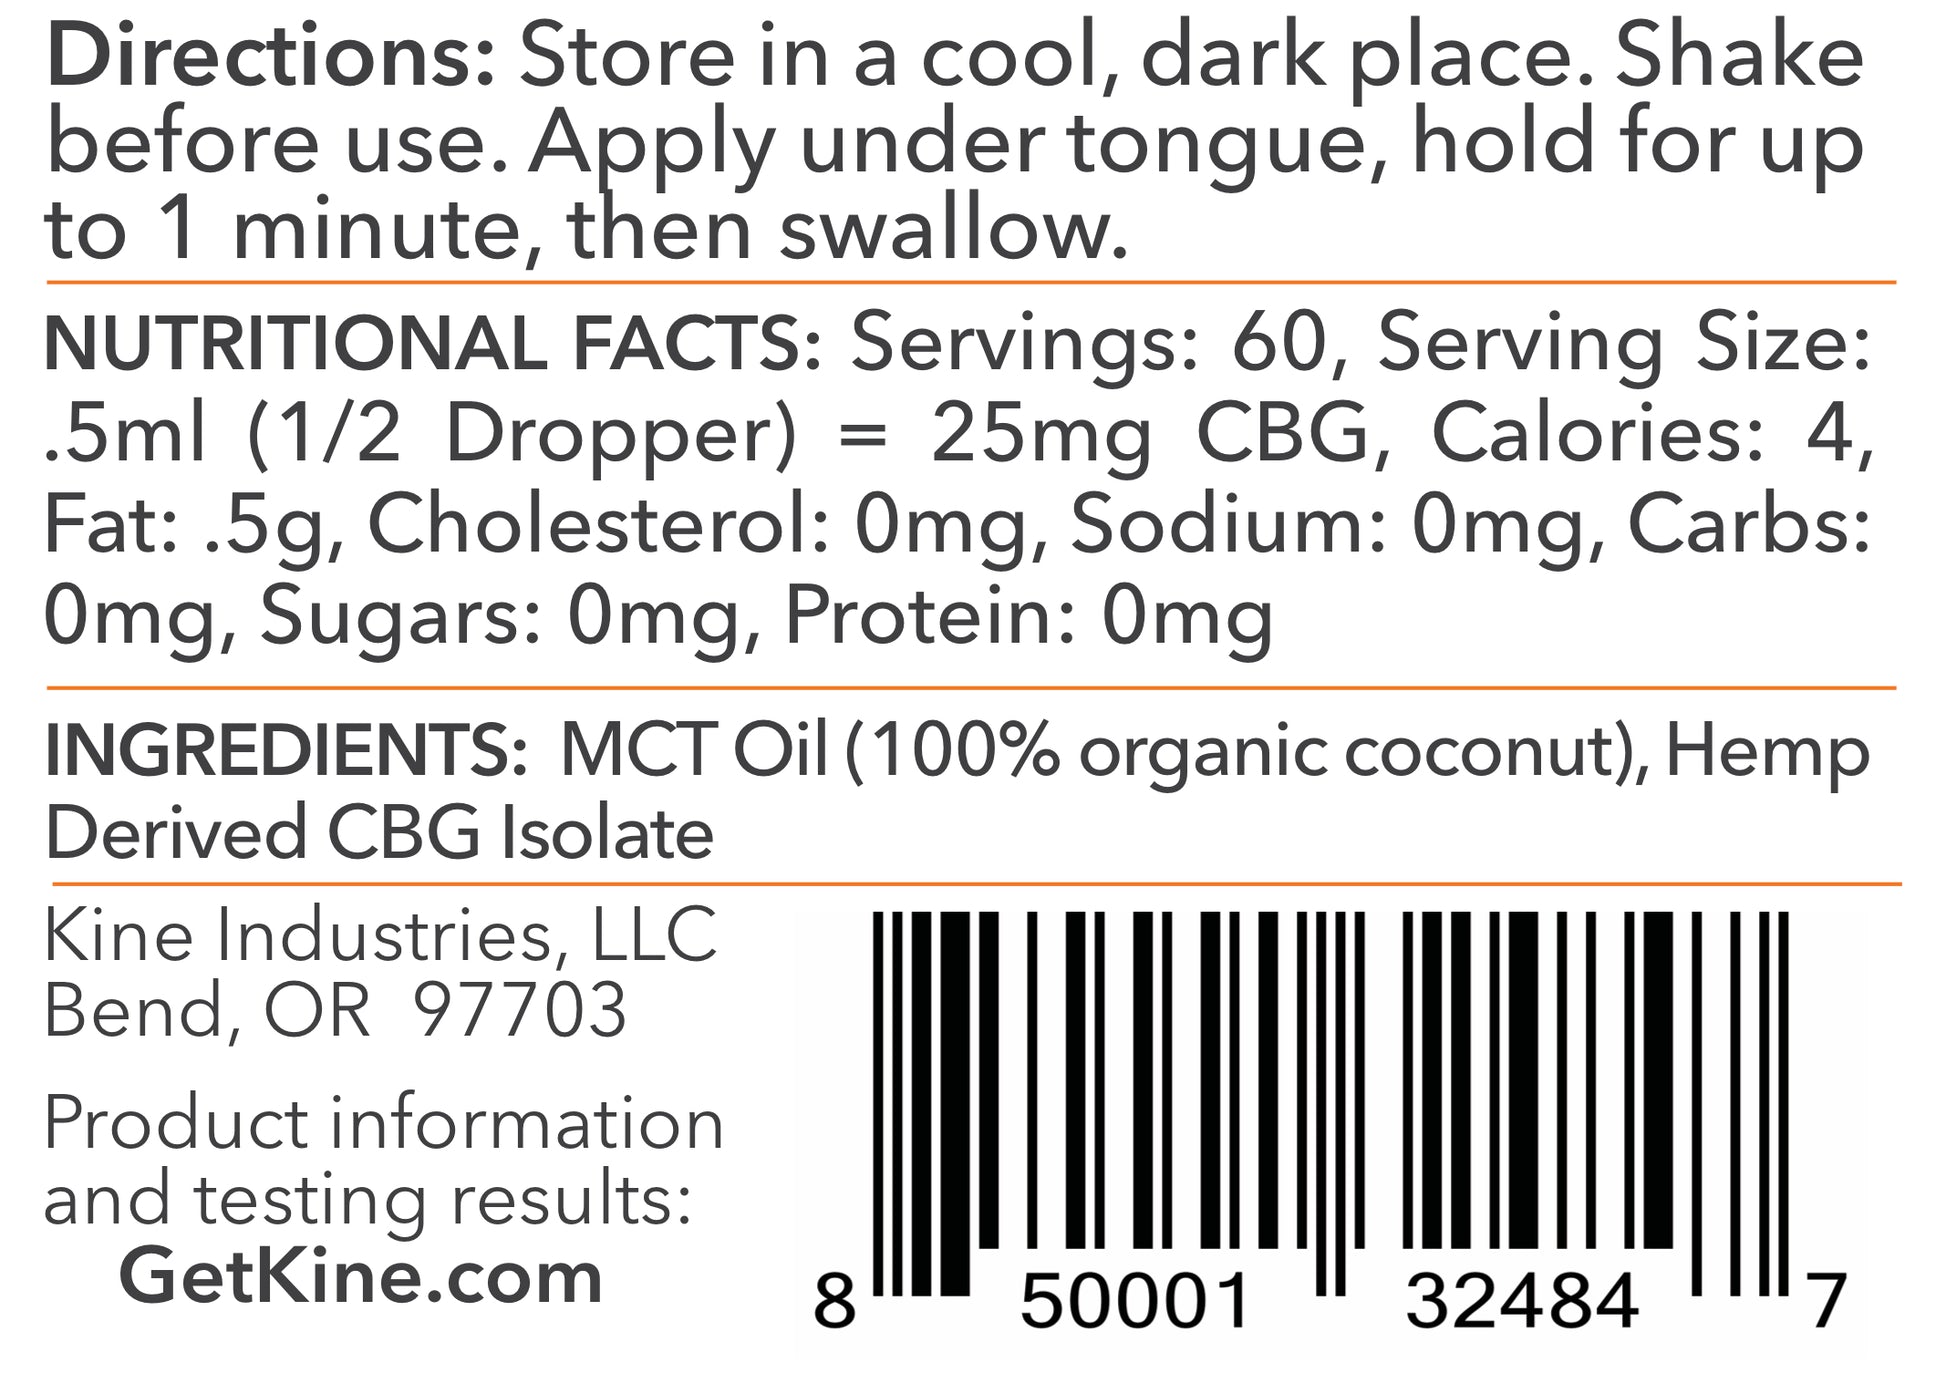 Kine Unflavored plain Organic CBG 1500mg Tincture drops ingredients list and nutritional facts